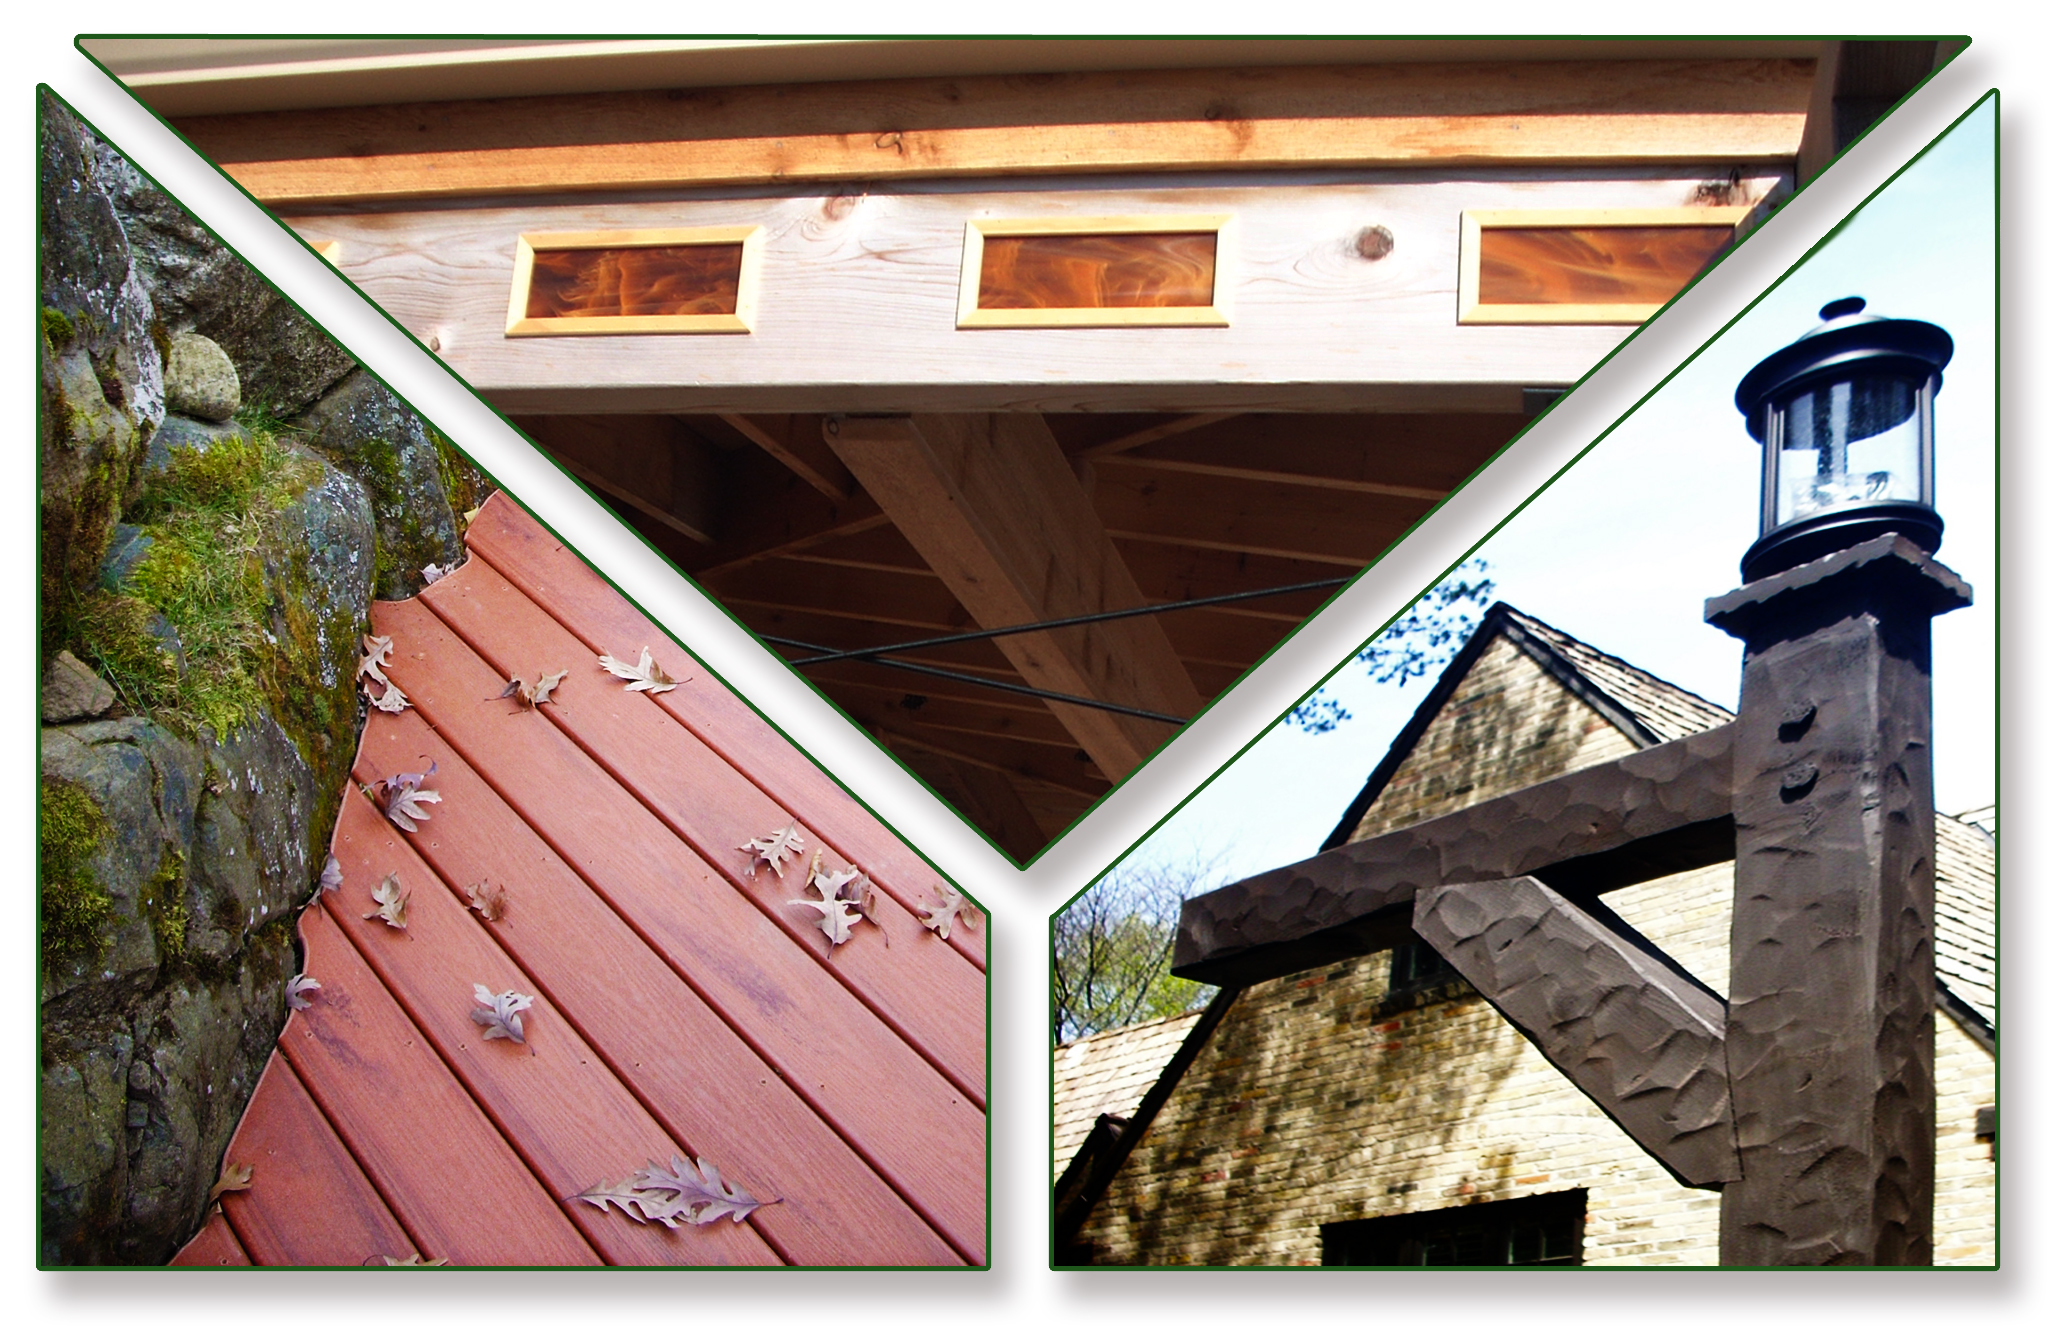 details of wood deck, outdoor structure, and lawn structures